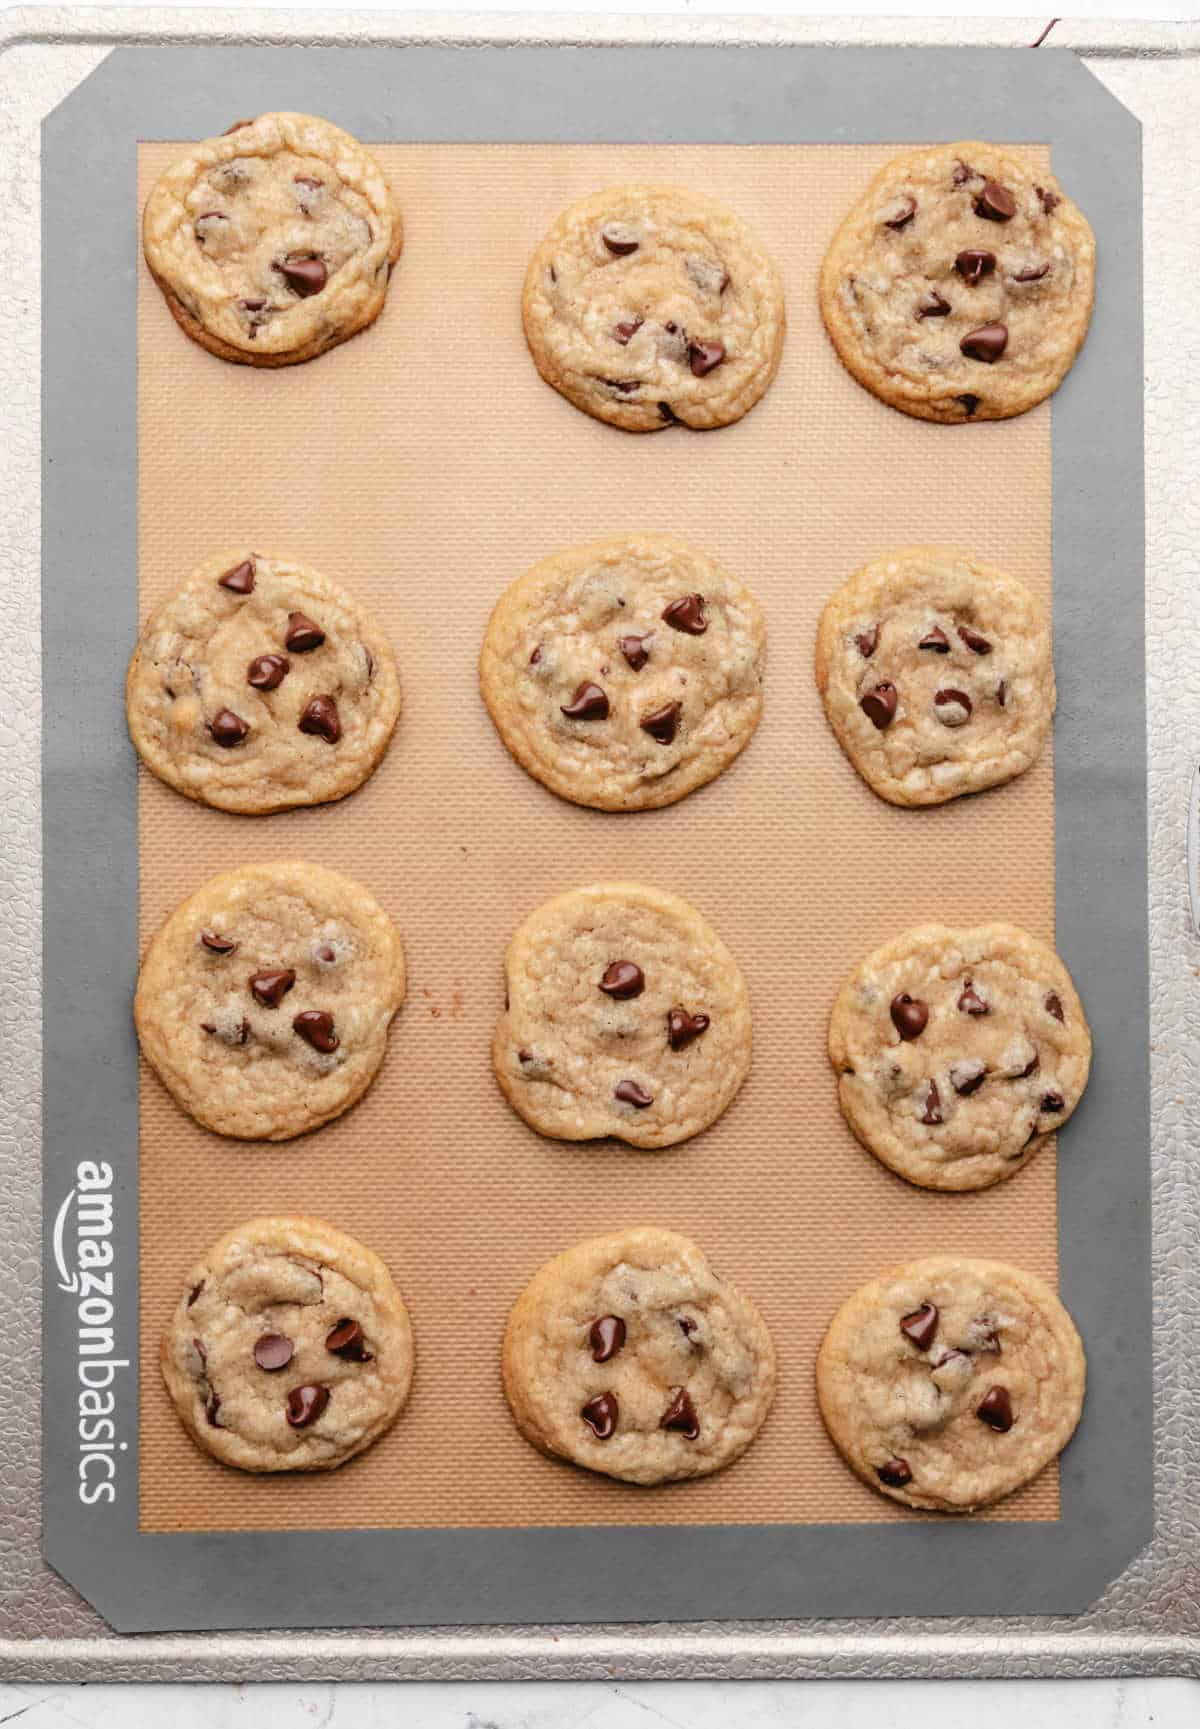 Baked coconut oil chocolate chip cookies on a baking sheet. 